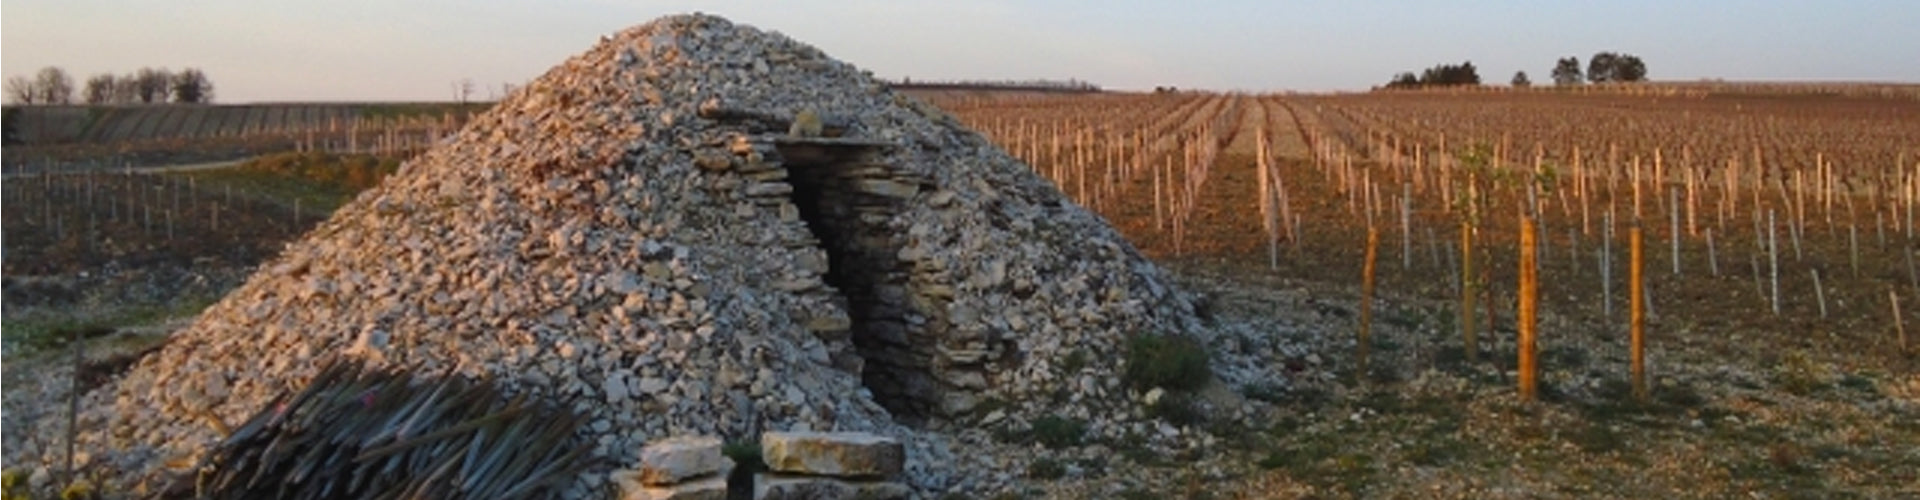 Cabotte in the vineyards of Chichée, Chablis